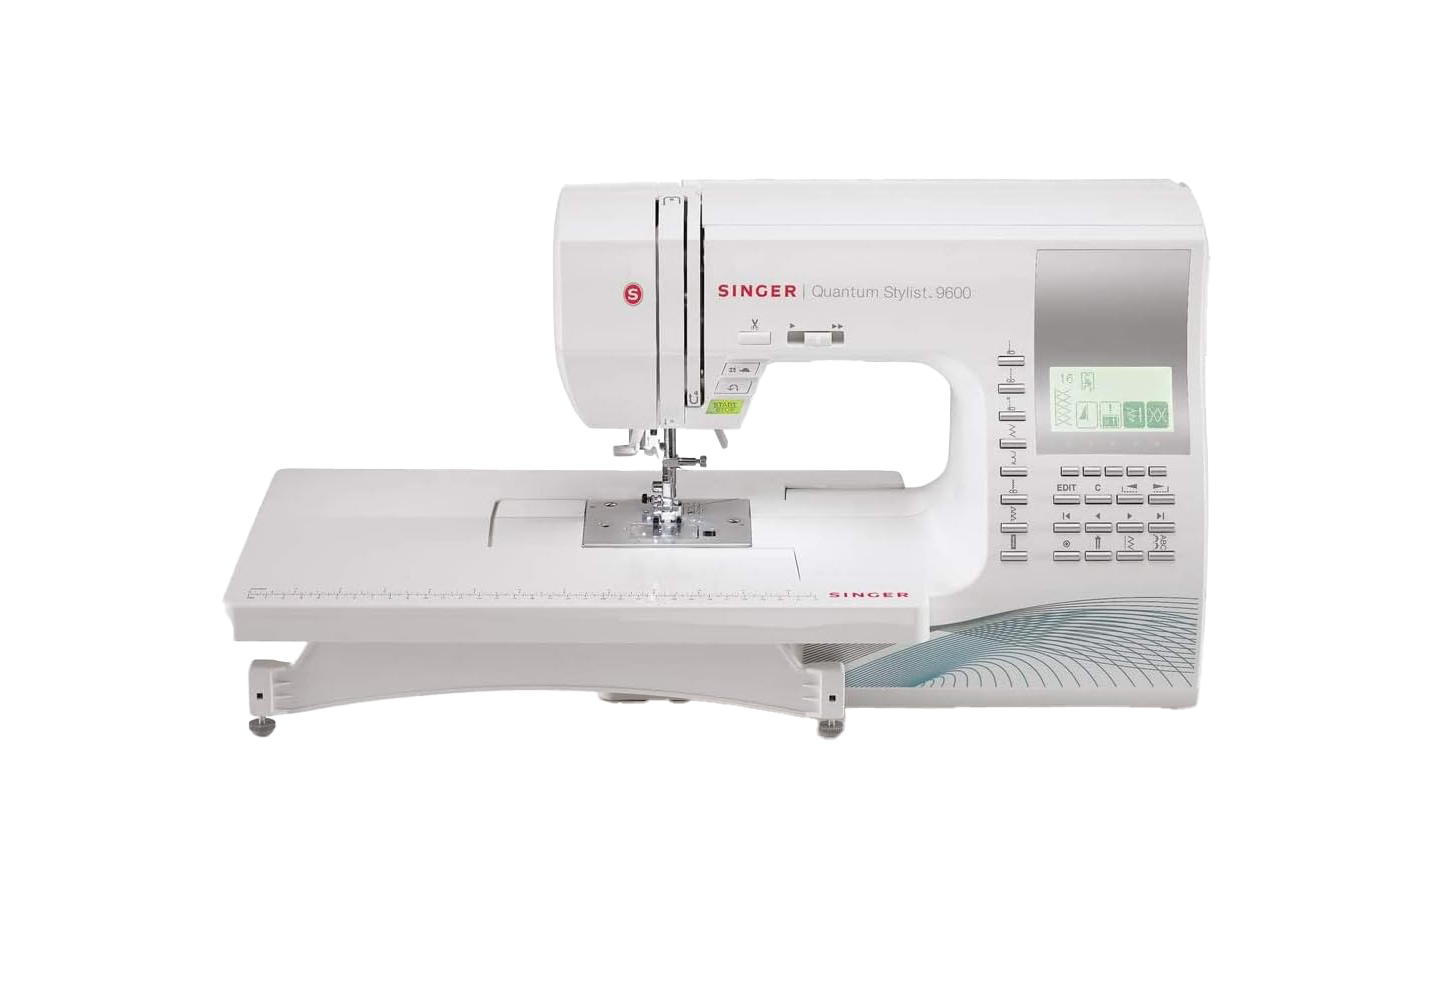 Singer 9960 Quantum Stylist™ Sewing Machine for Sale at World Weidner